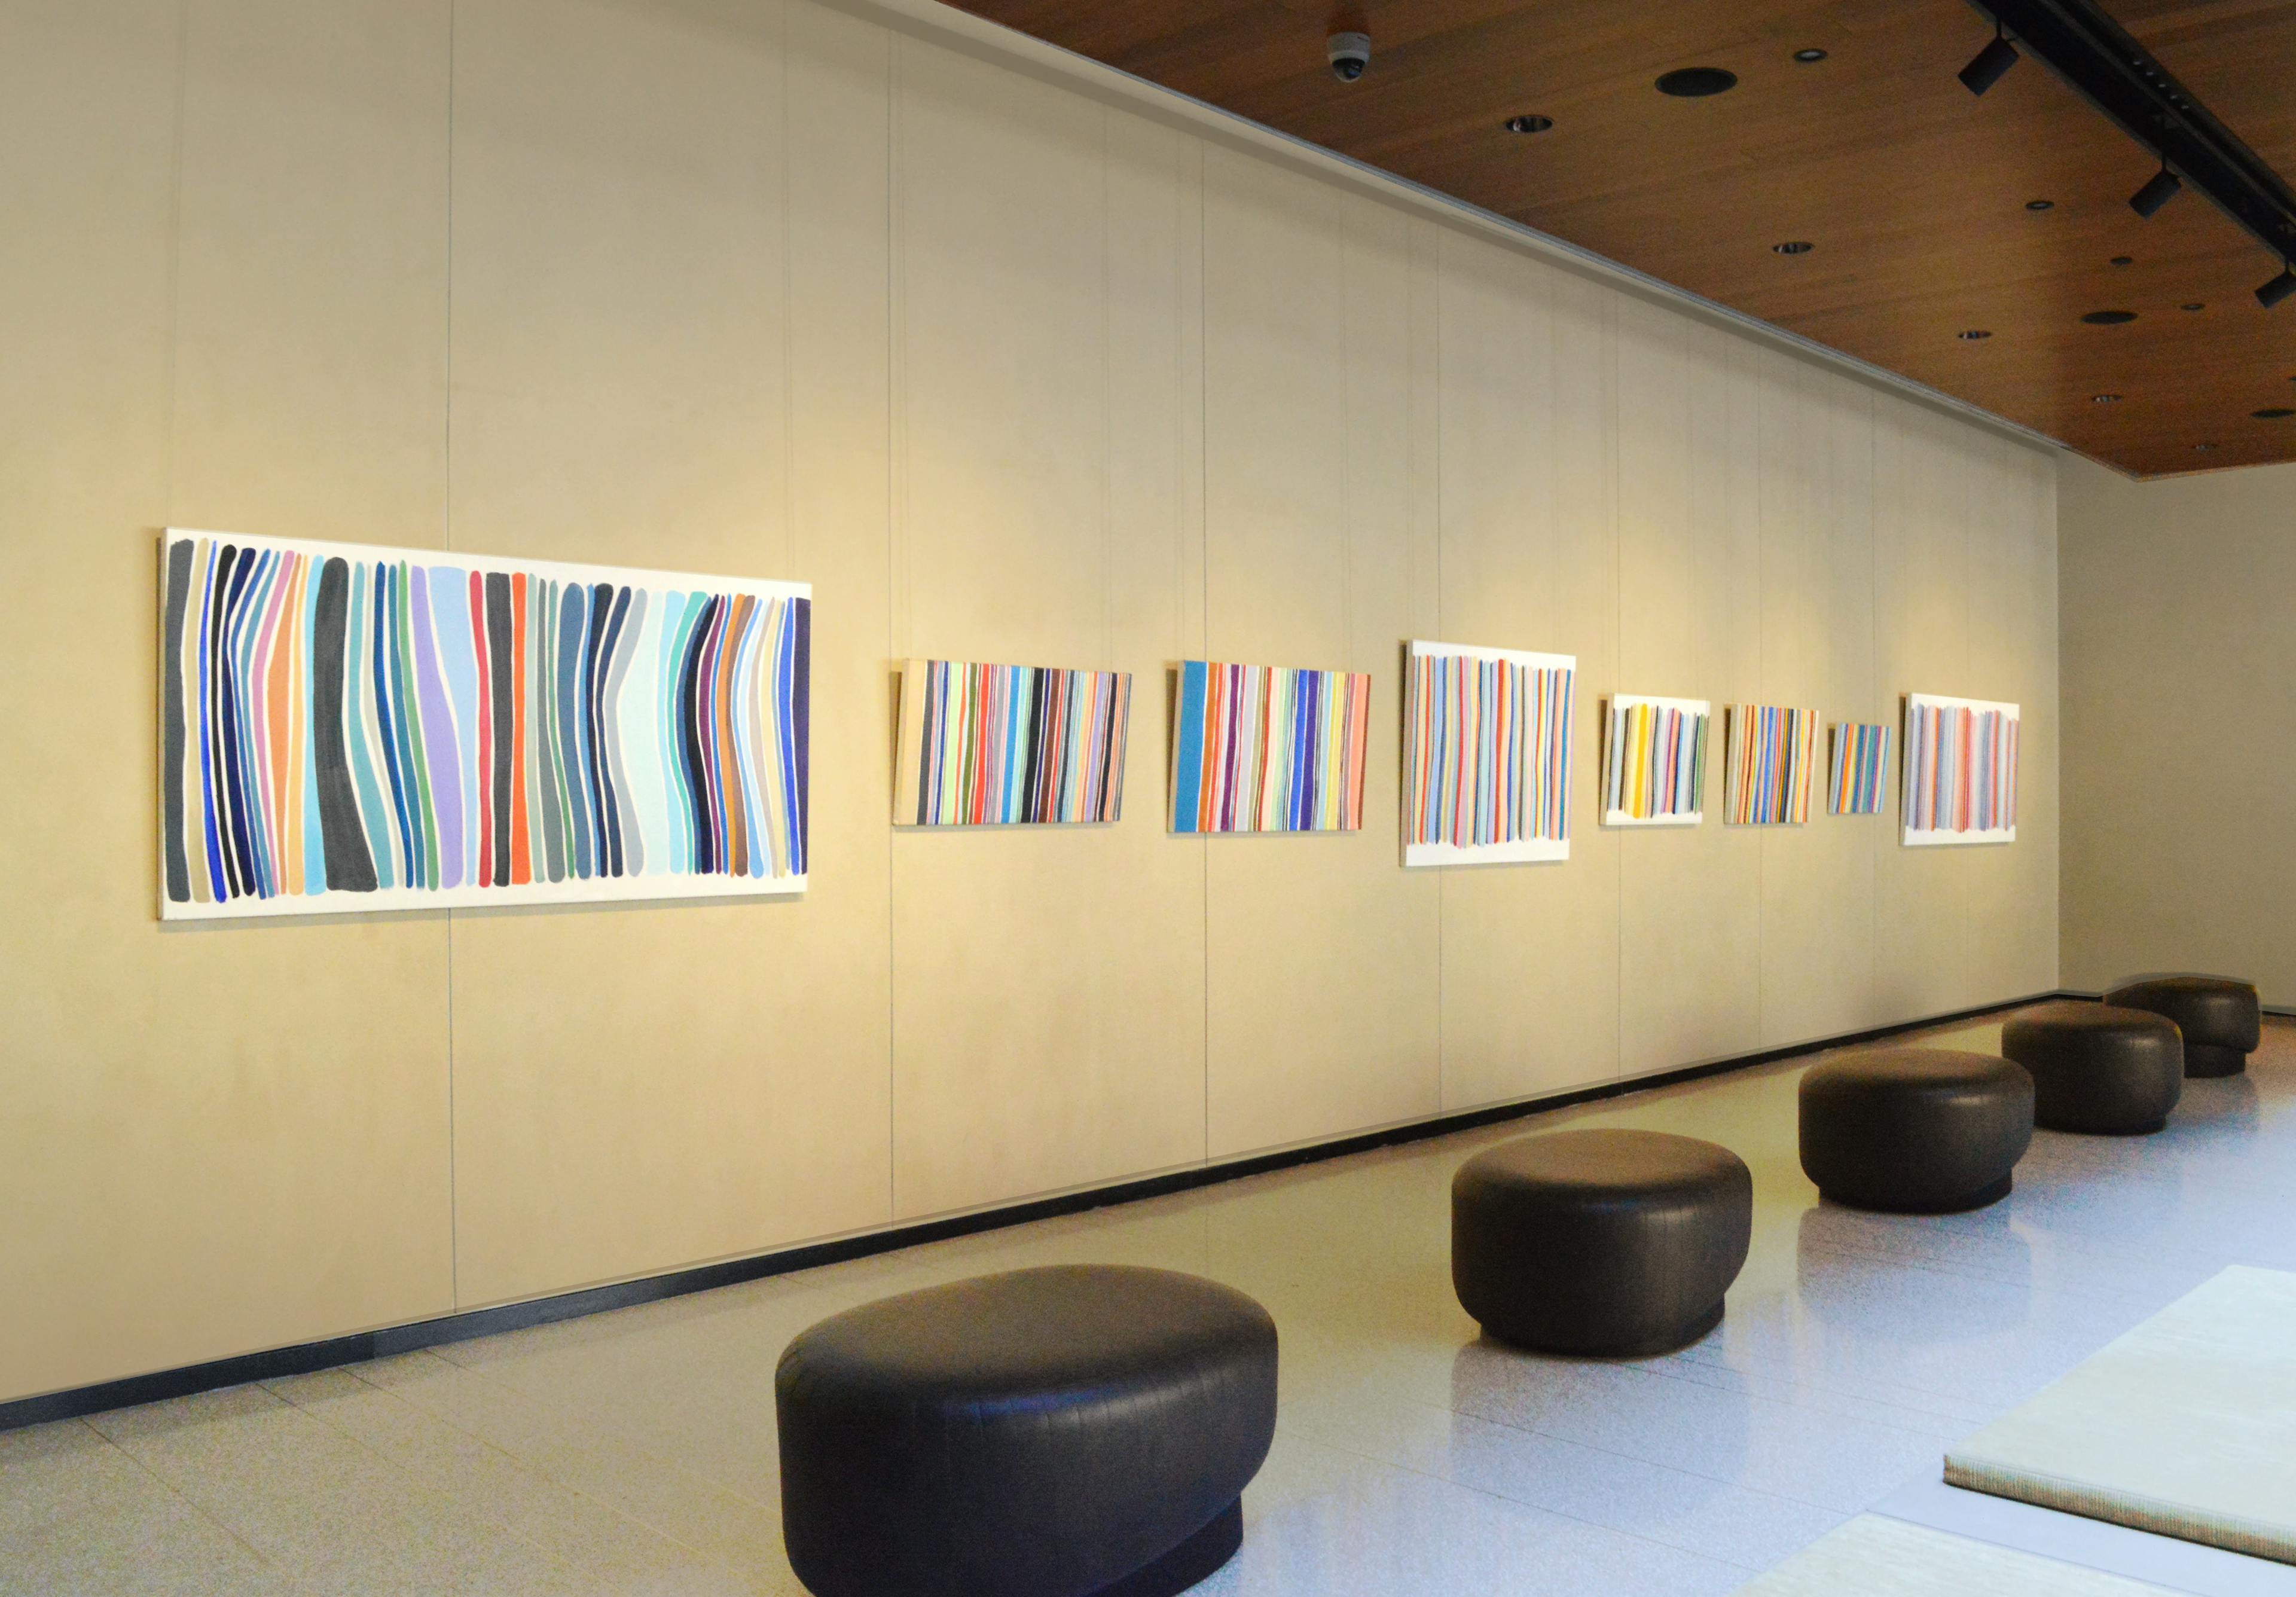 Artwork installed as part of Colorfields at Gotham West, one of Uprise Art's Exhibitions in New York, NY.